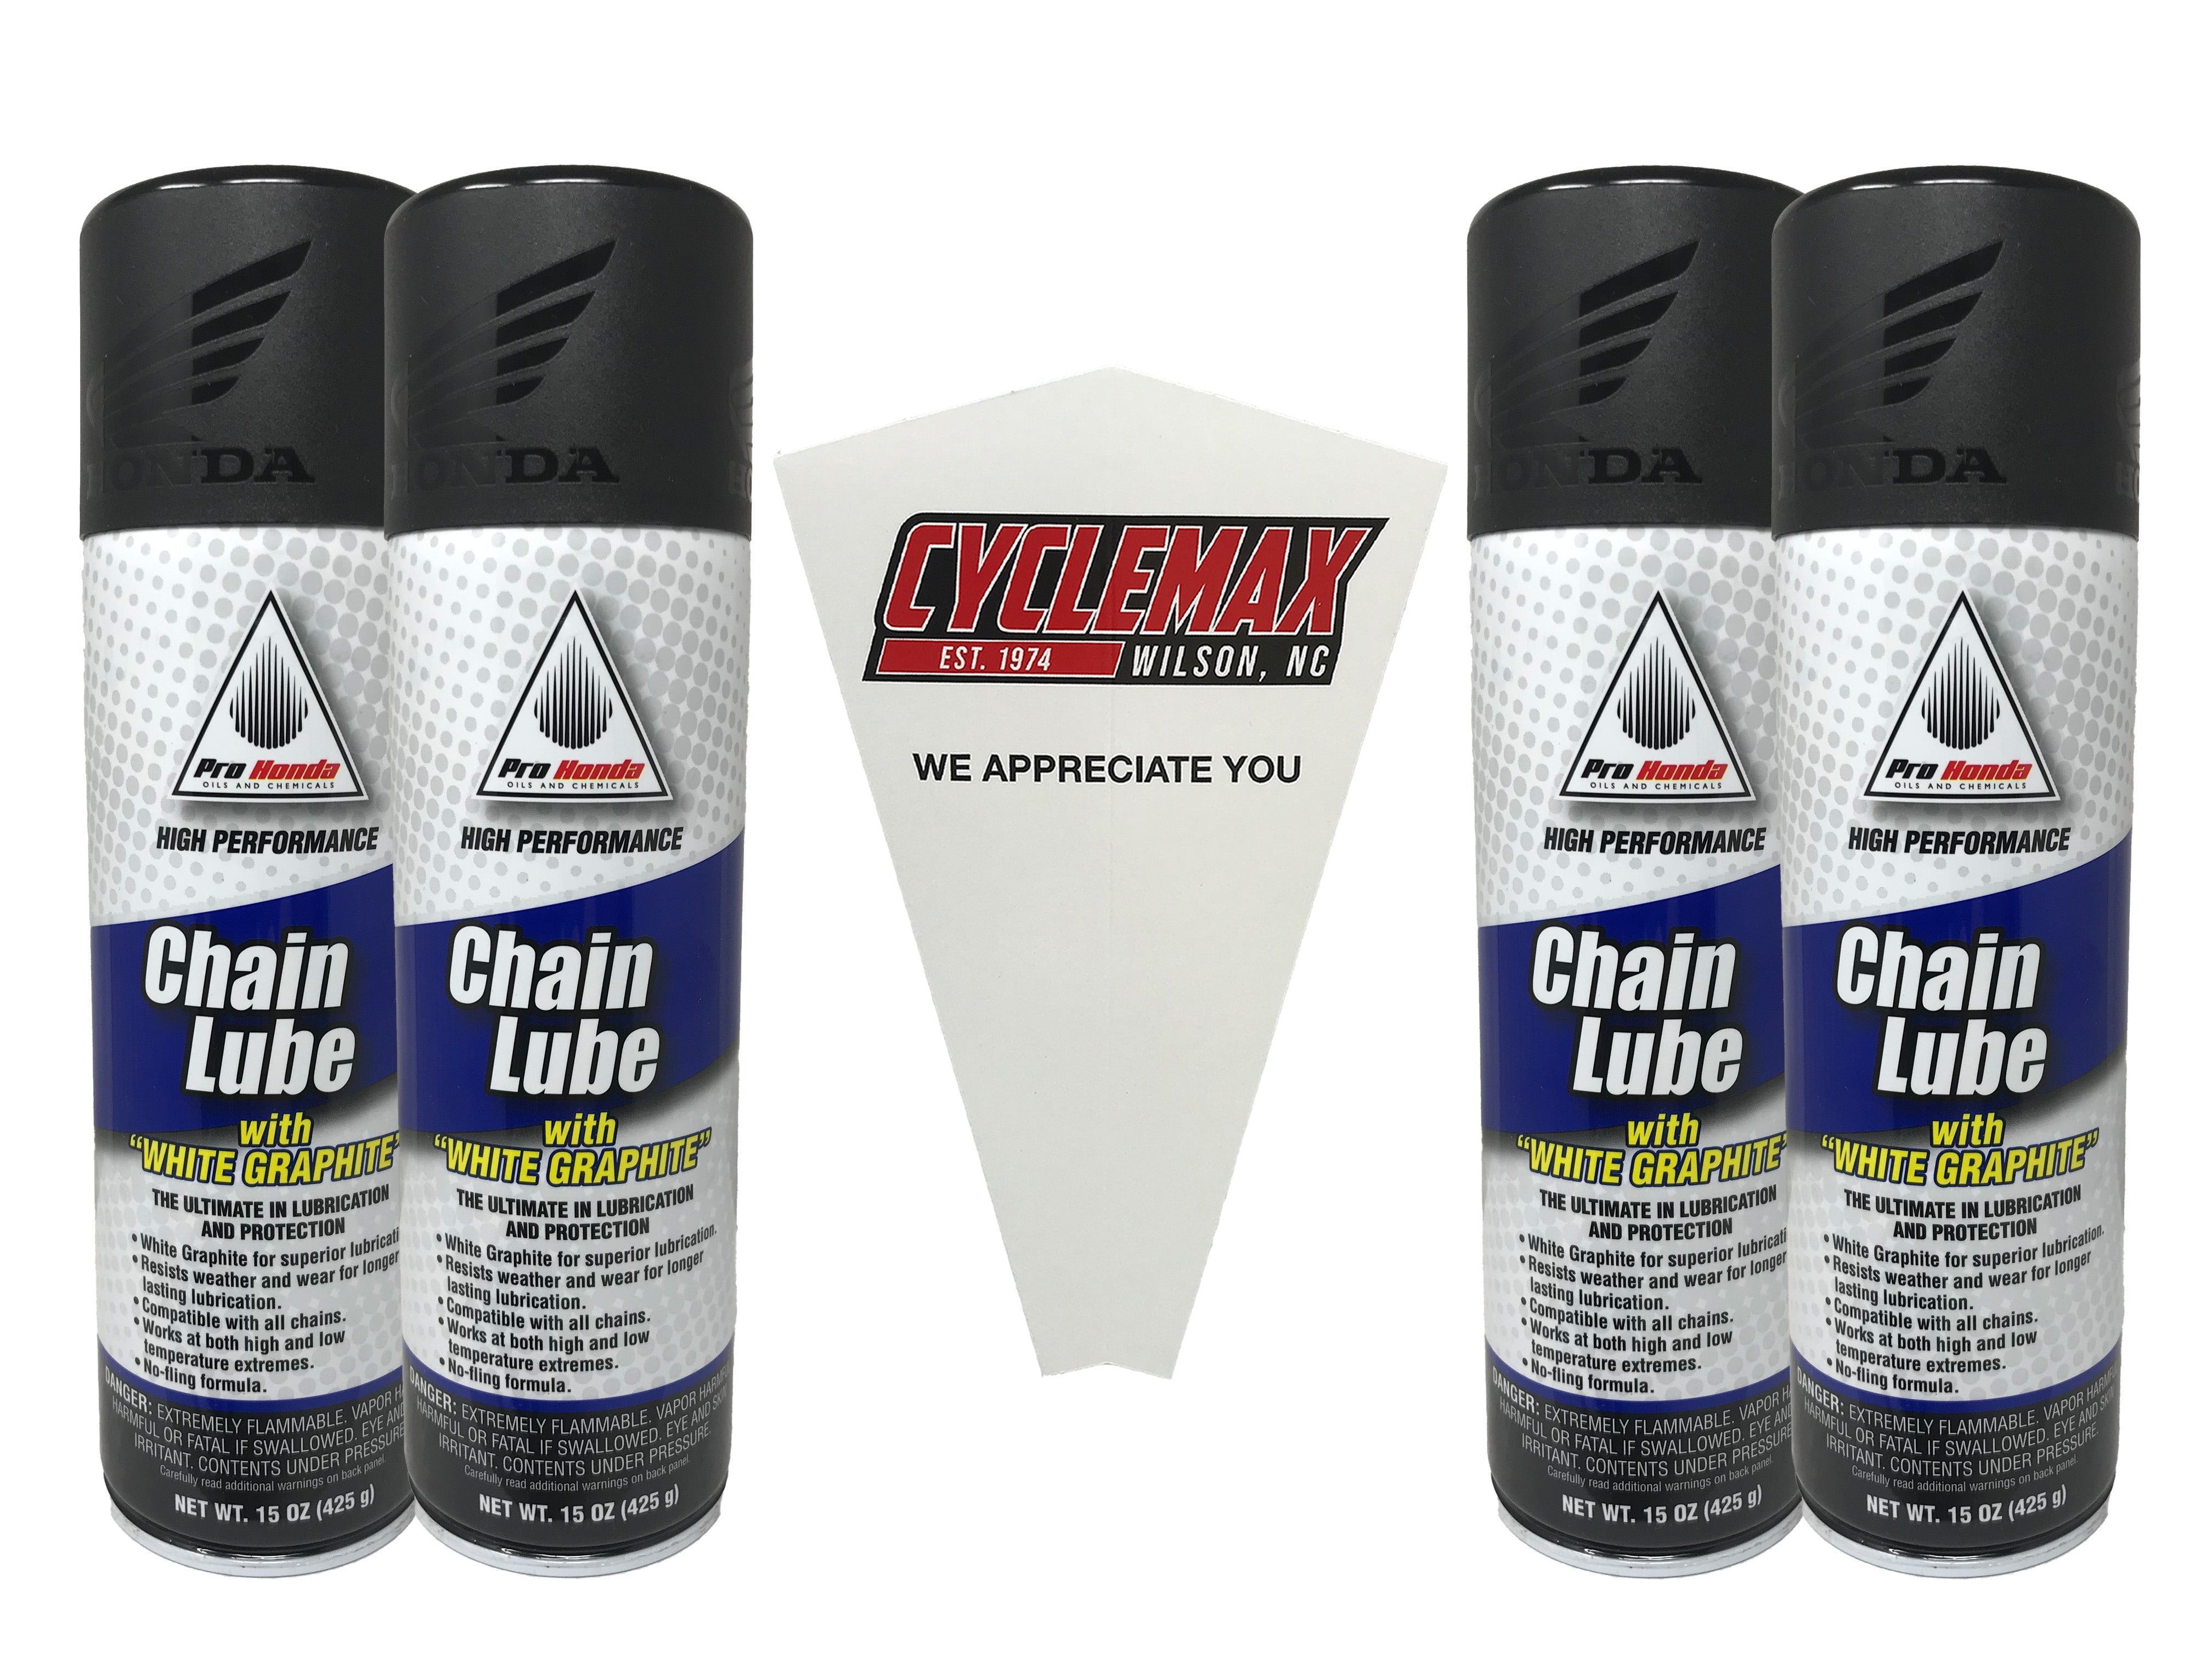 Cyclemax Four Pack for Honda Chain Lube with White Graphite 08732-CLG00 Contains Four 11oz Cans and a Funnel